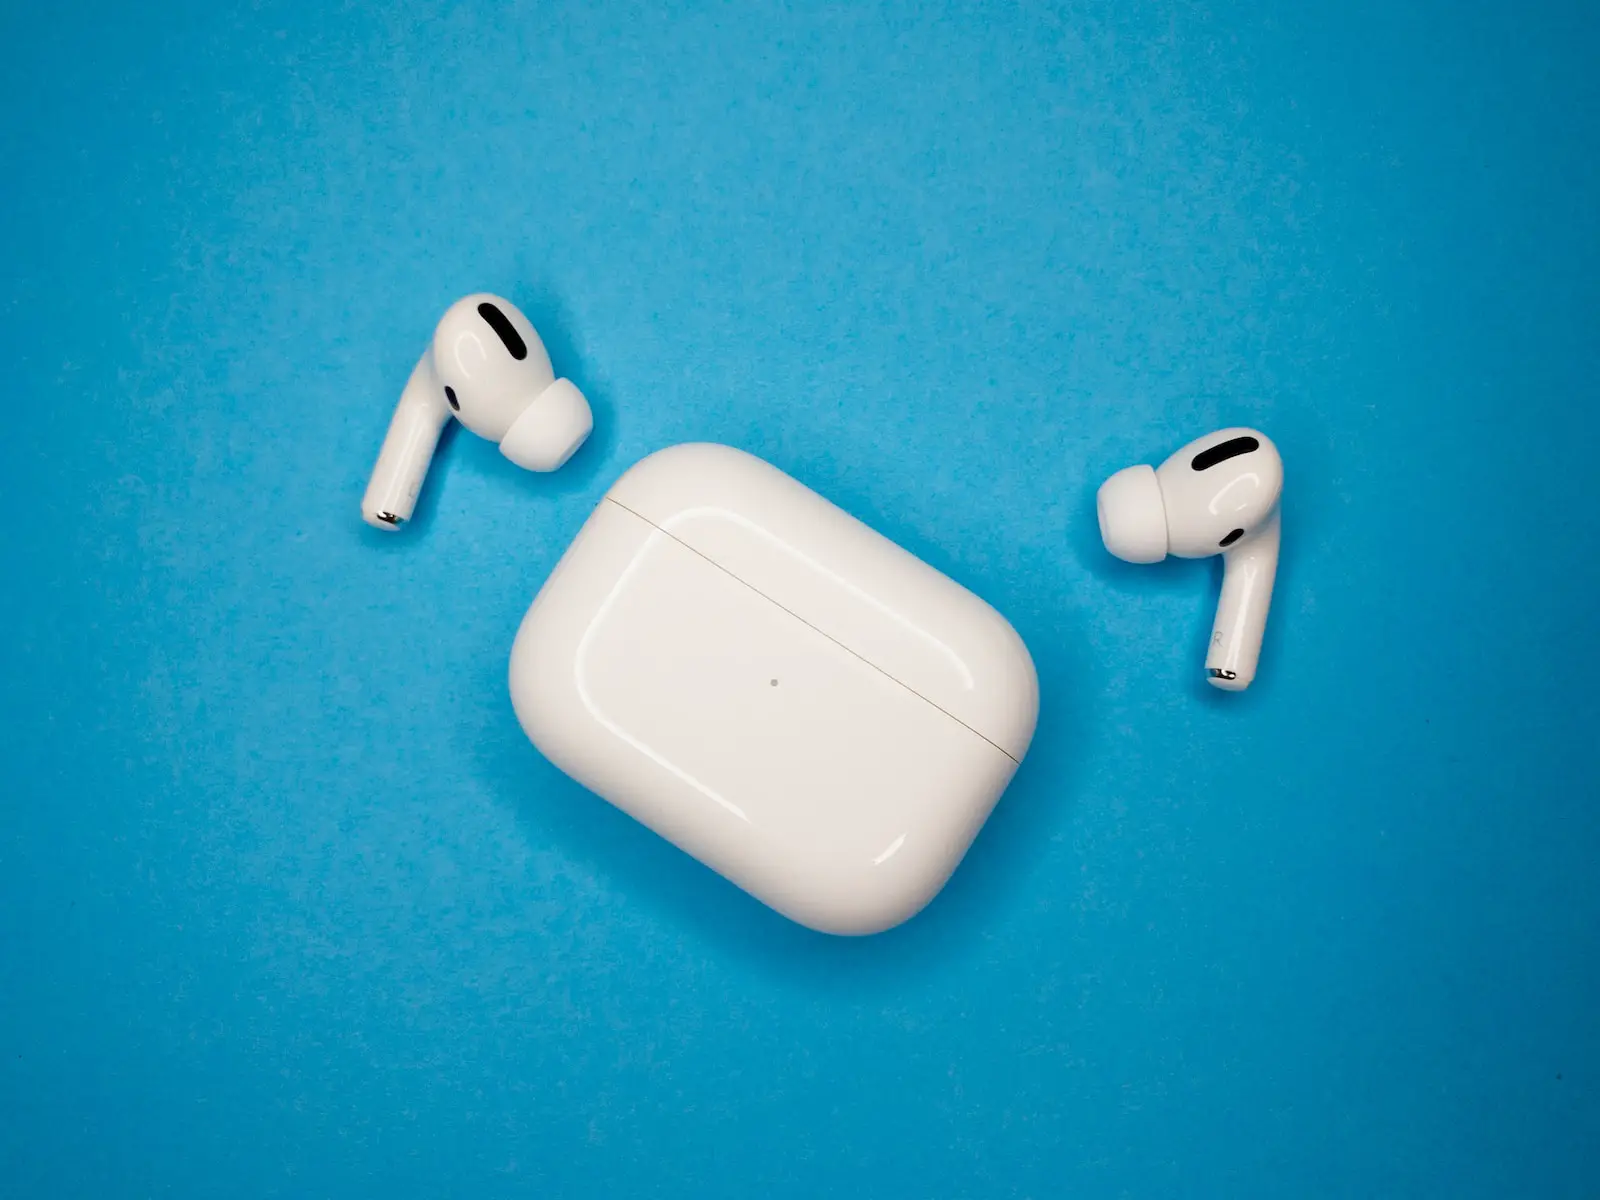 Why are airpods not updating firmware?